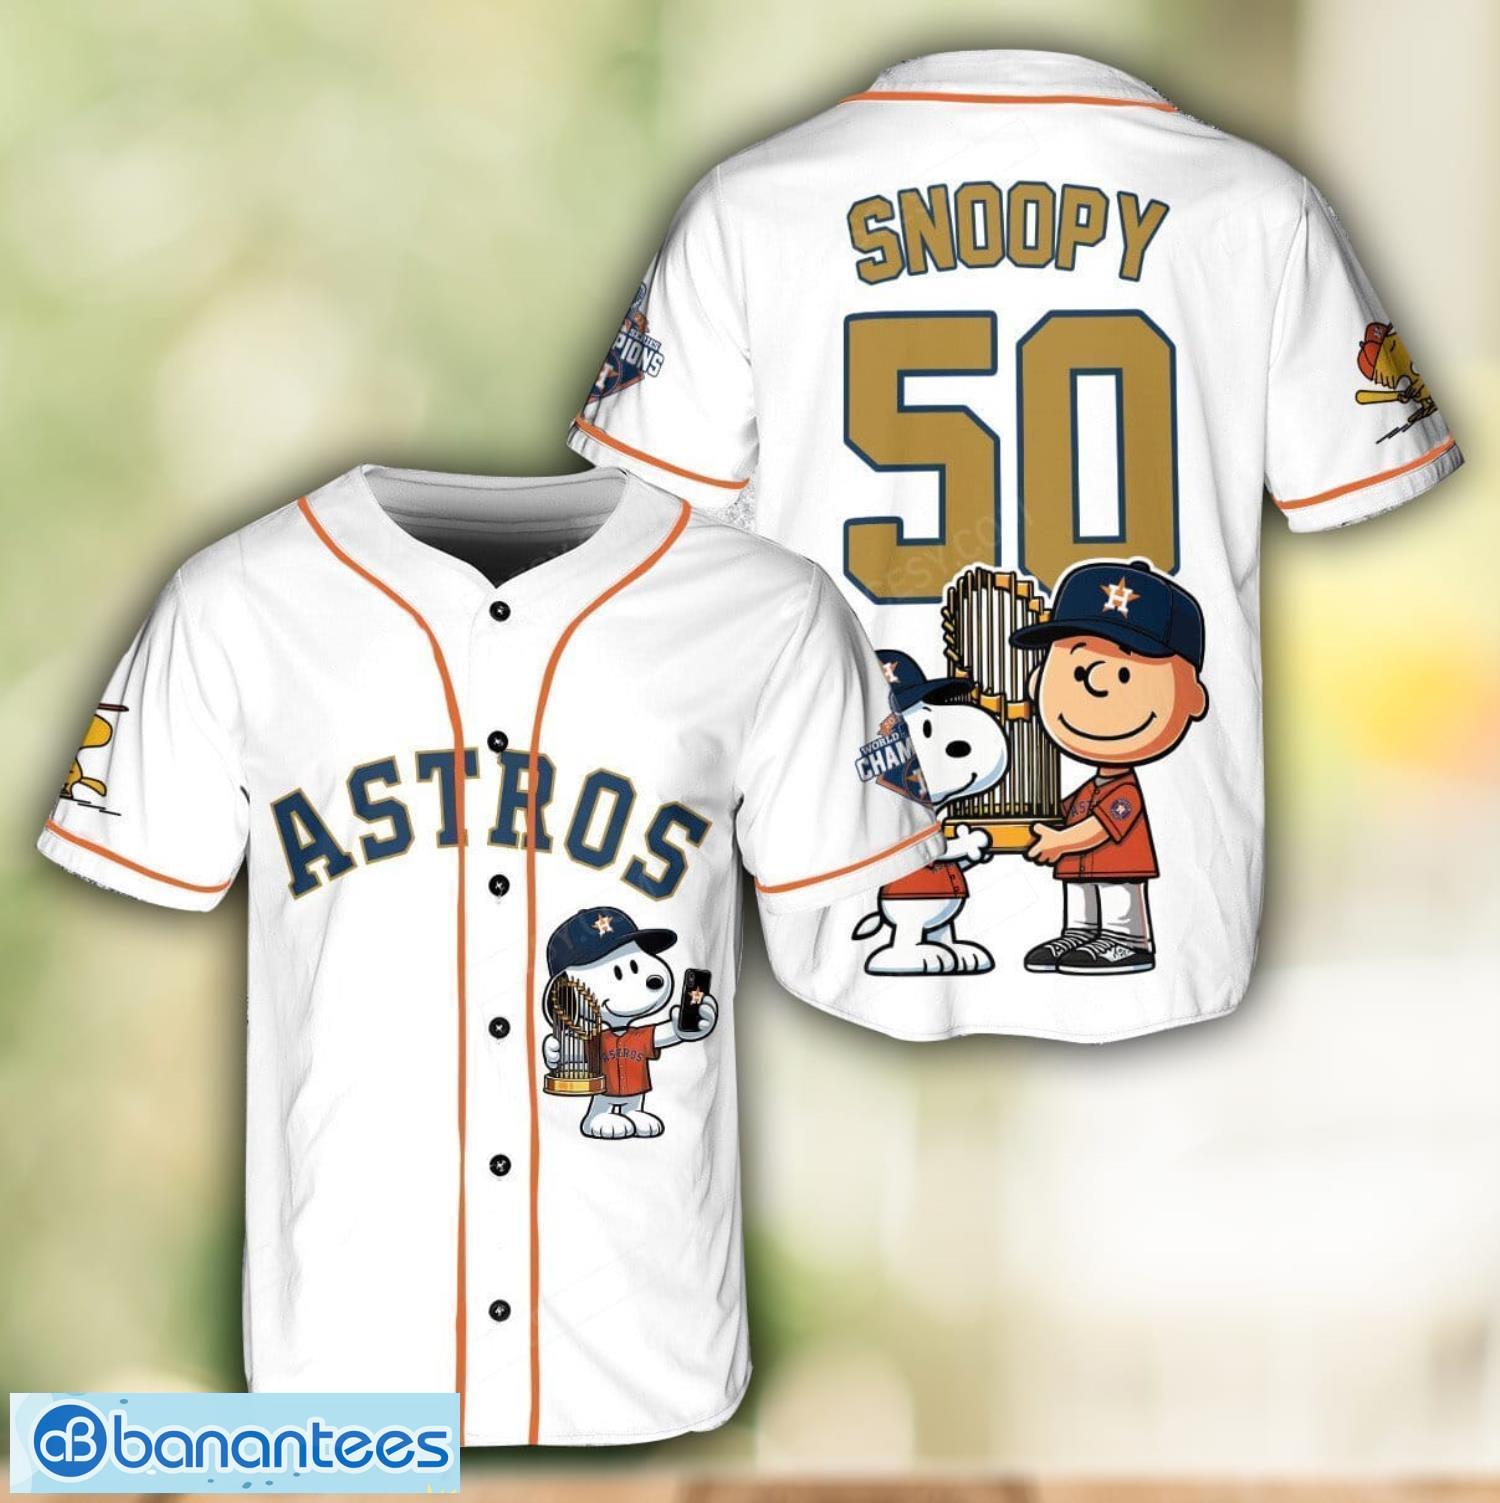 Peanuts Funny Houston Astros Shirts, Houston Astros Christmas Gifts - Happy  Place for Music Lovers